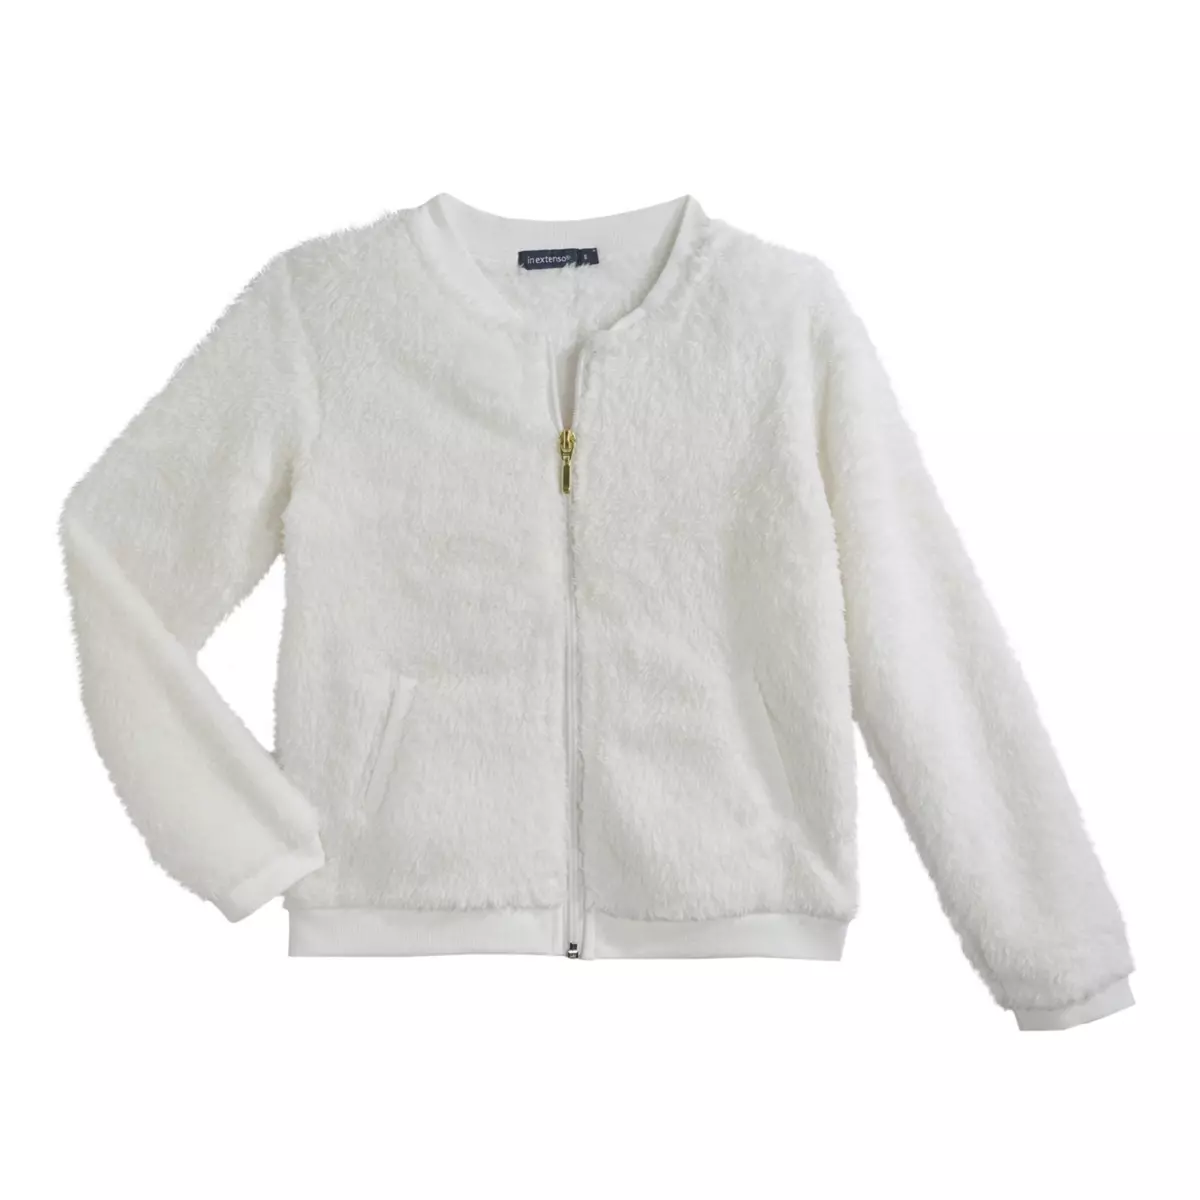 INEXTENSO Gilet teddy fille 